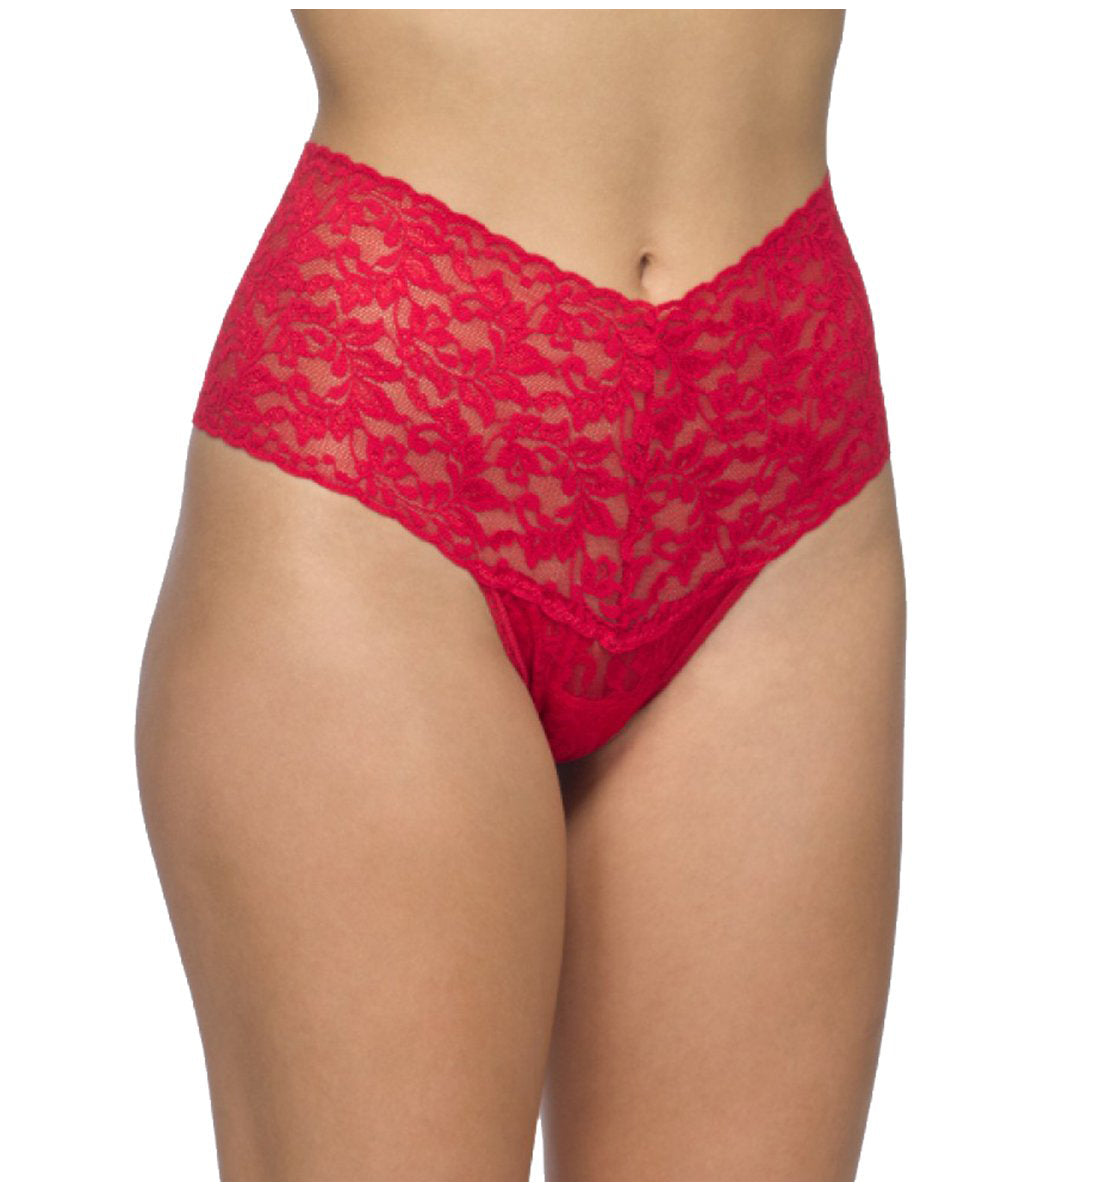 Hanky Panky Signature Lace Retro Thong (9K1926),Red - Red,One Size